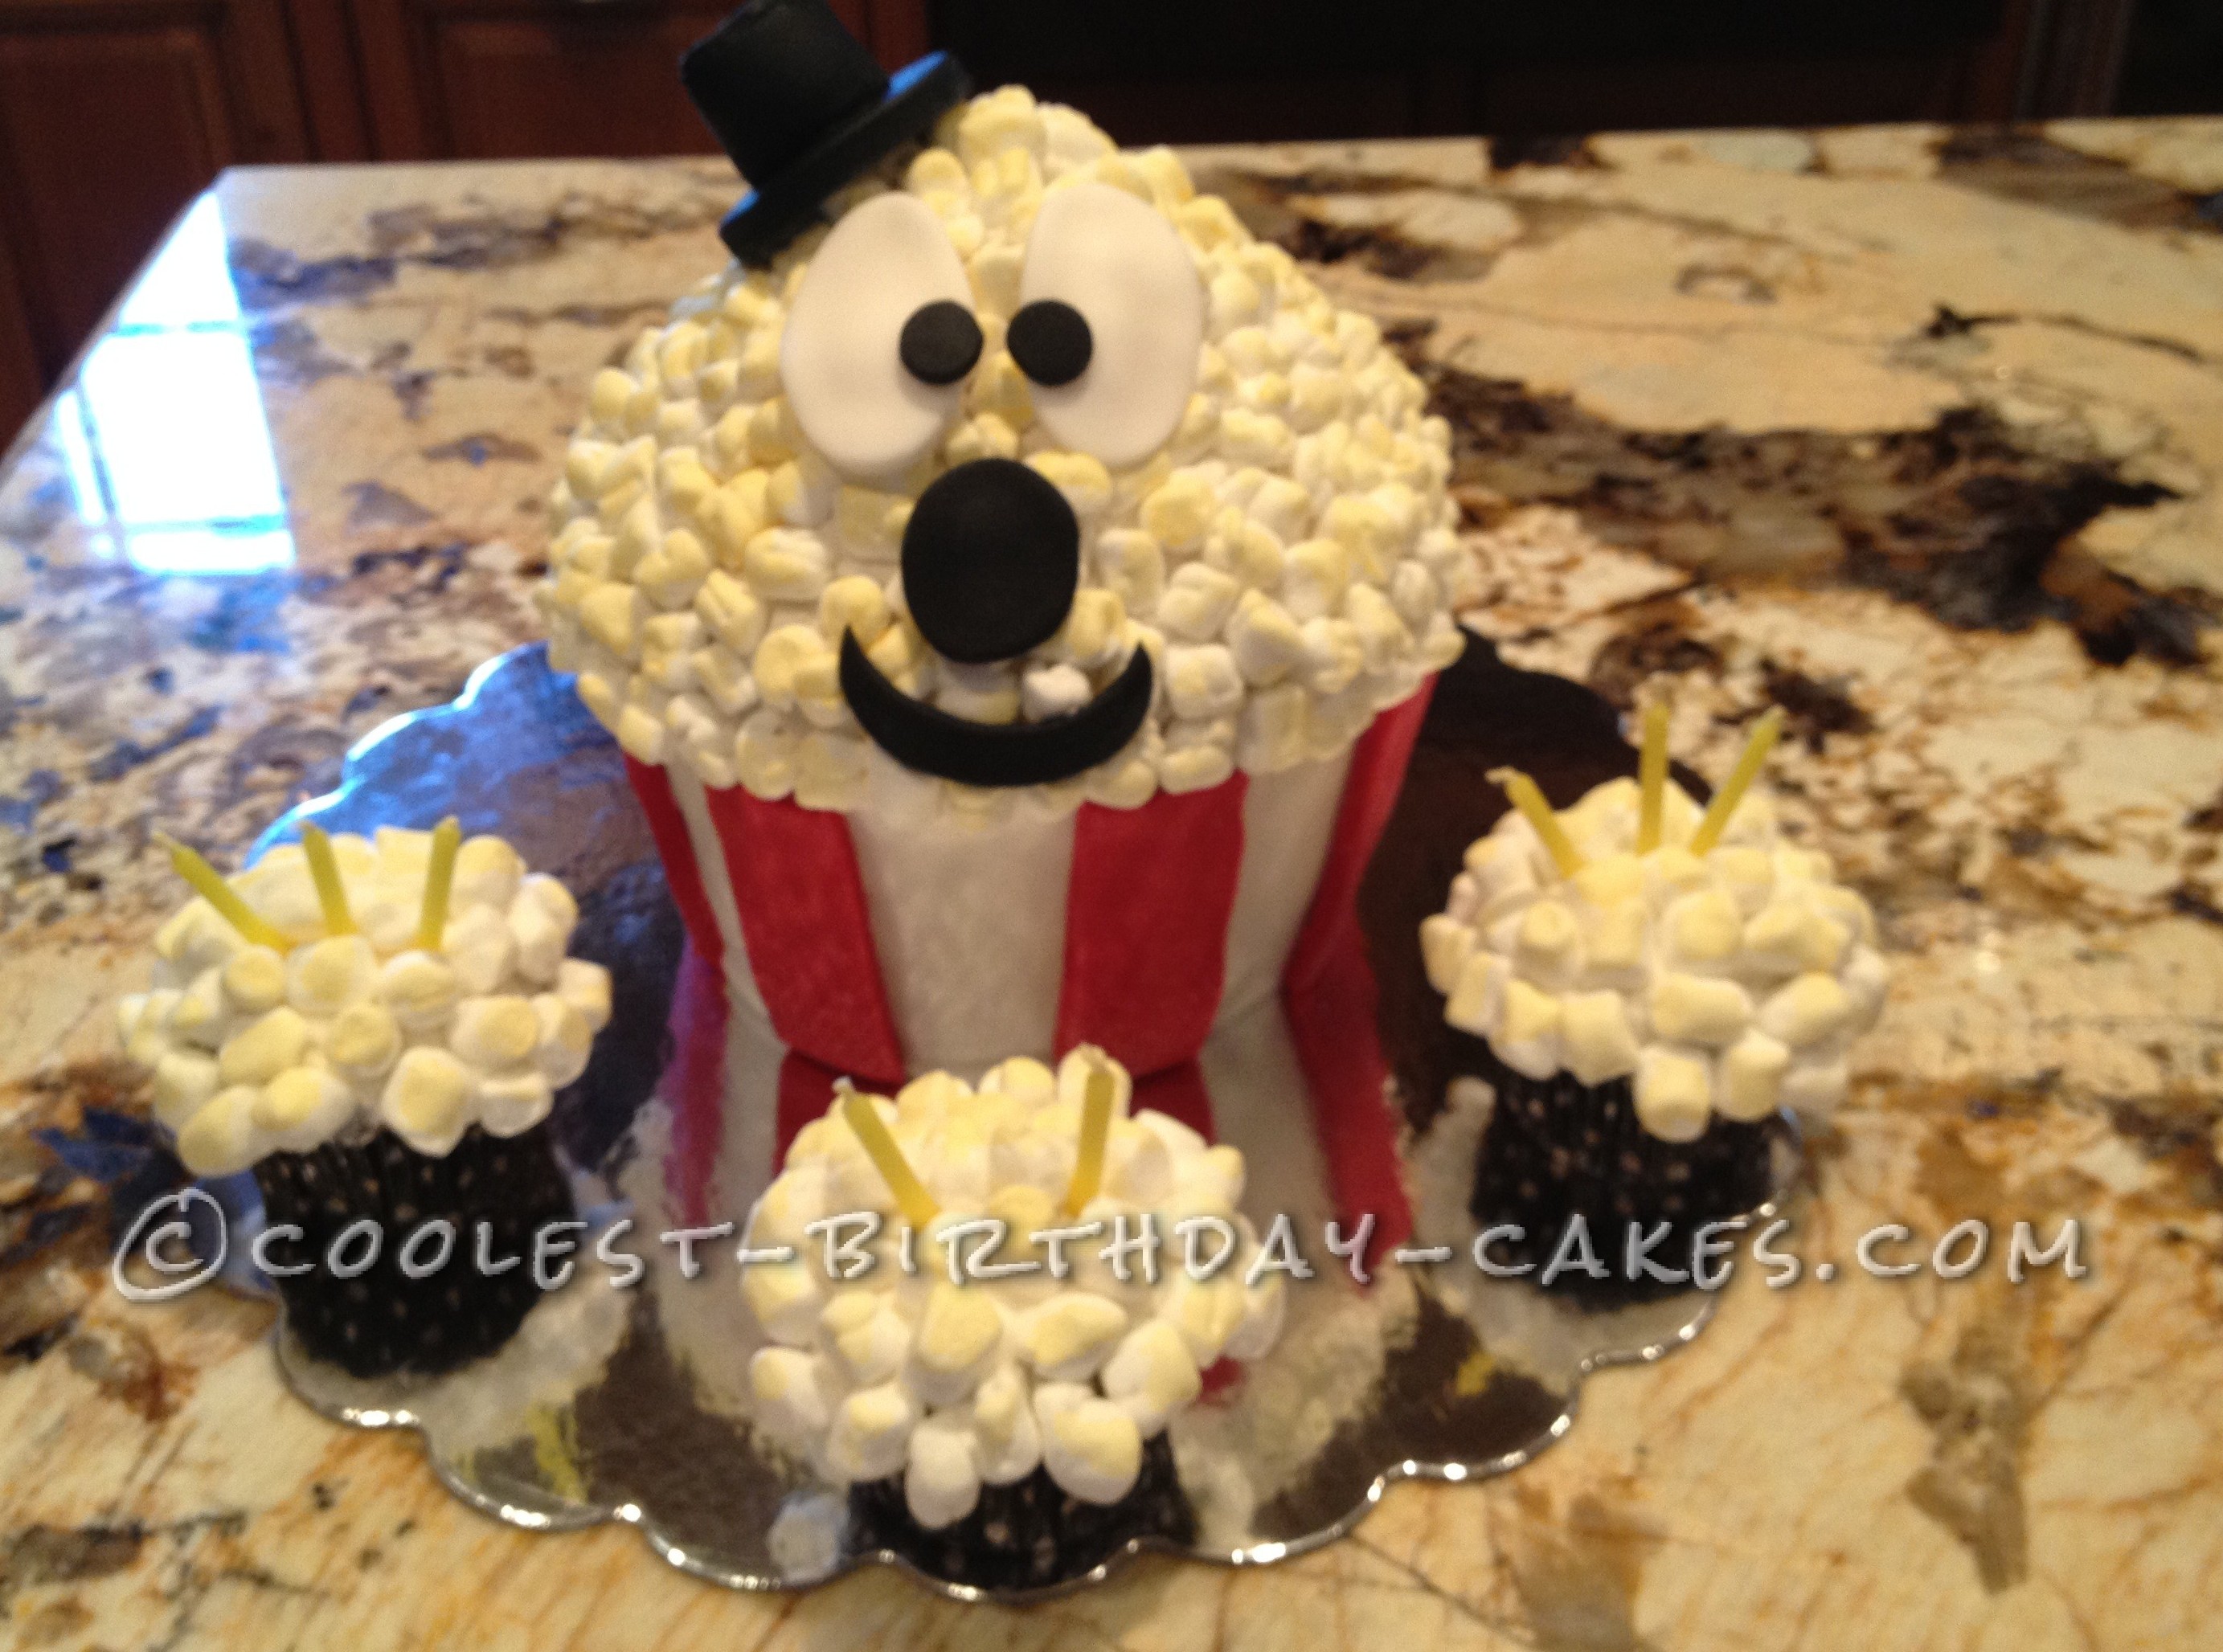 Coolest Popcorn Cake for Movie Themed Birthday